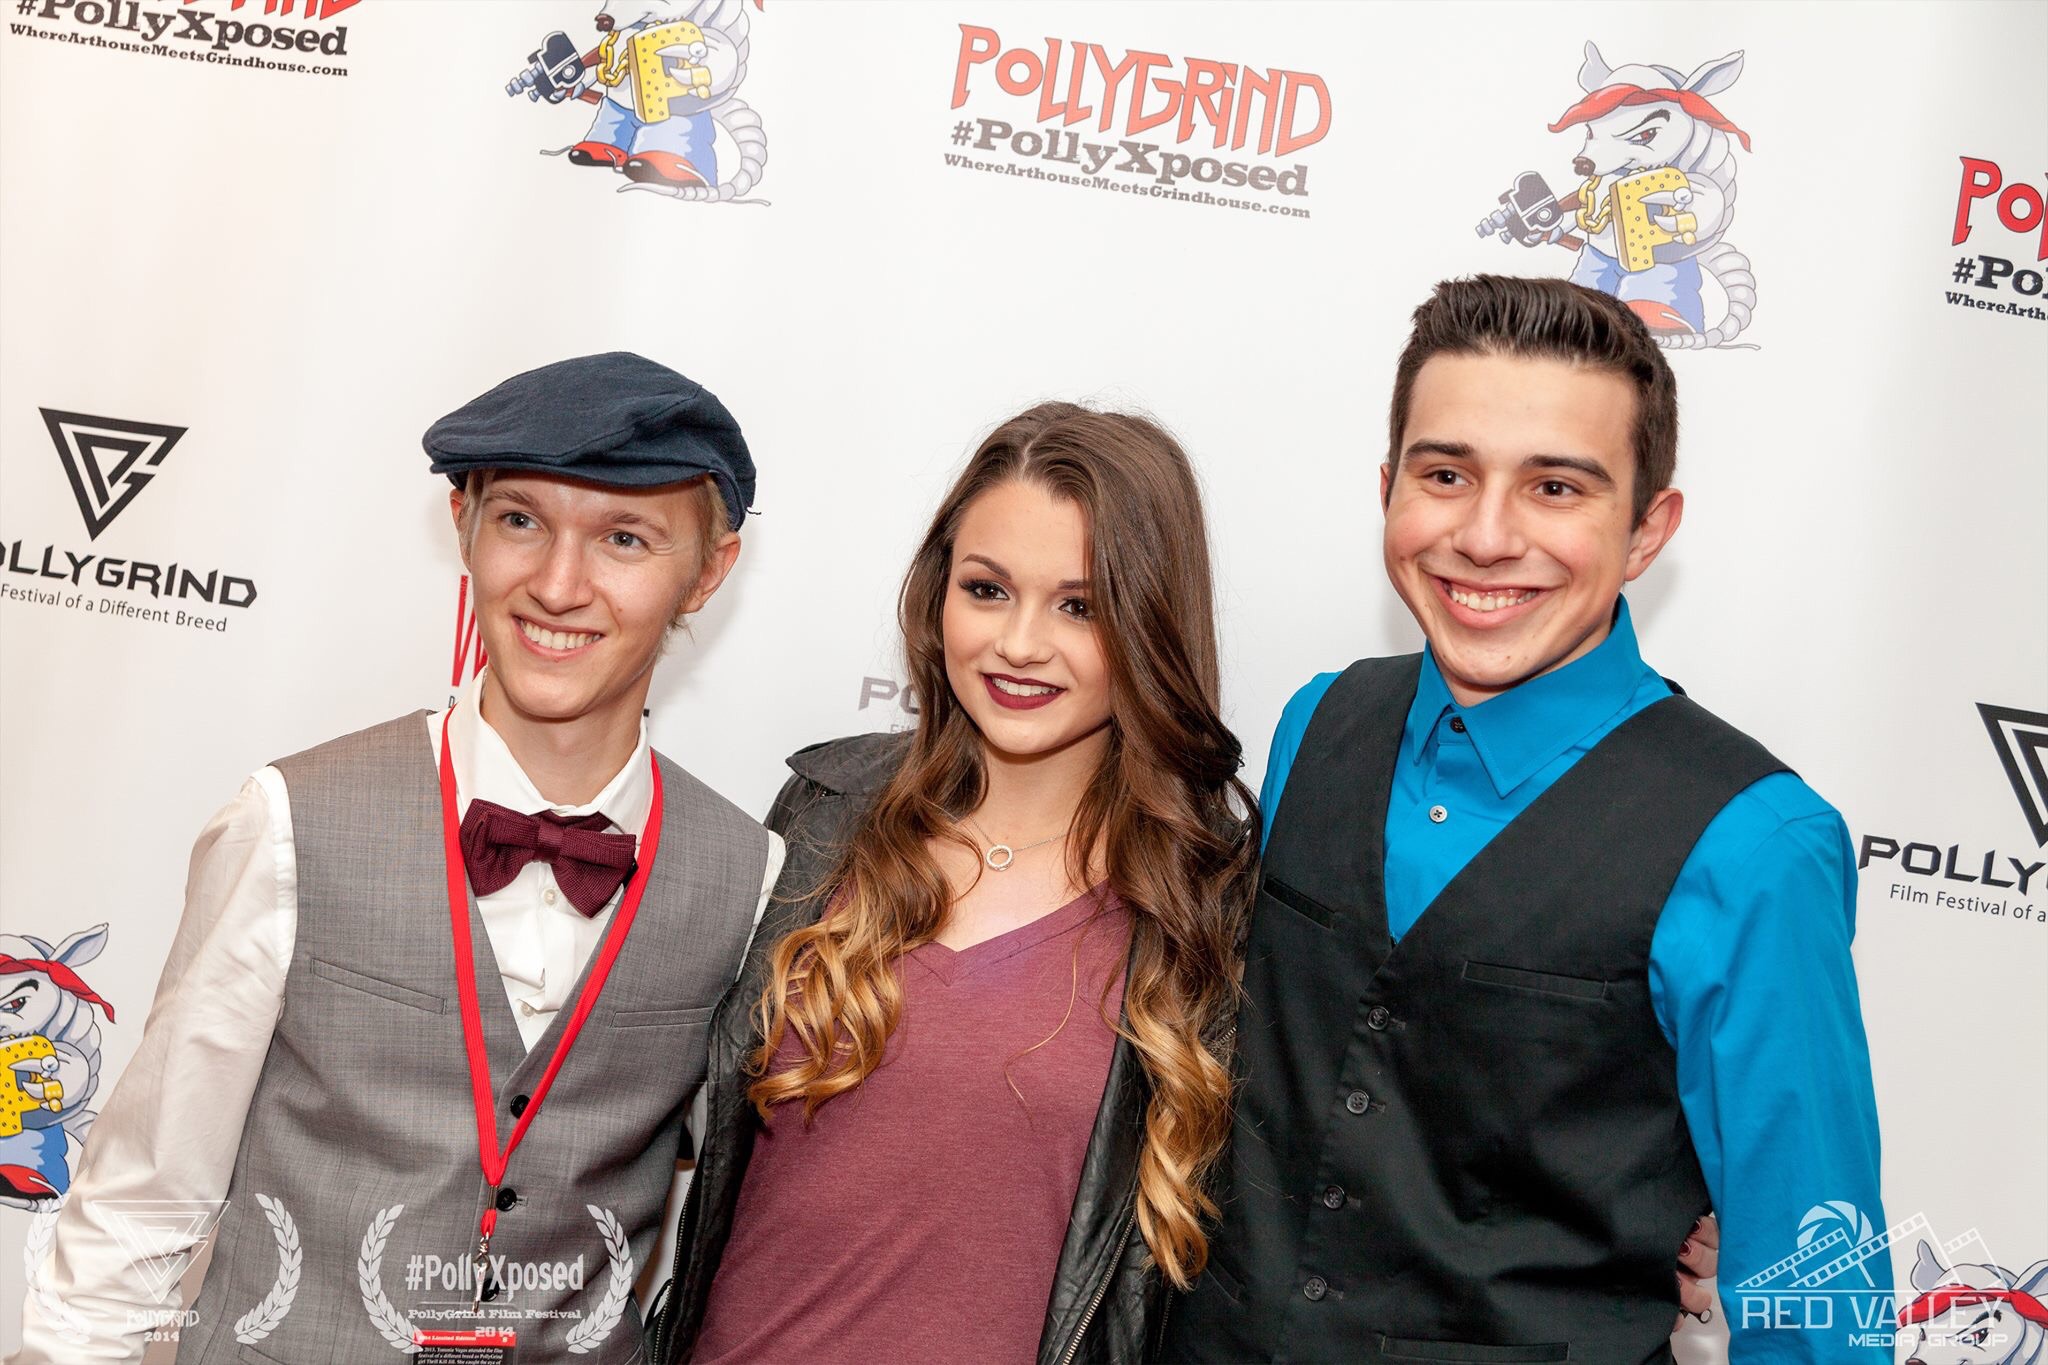 Joey Bell at the world premiere of HEIDI at the Galaxy Theaters in Green Valley as part of the Pollygrind Film Festival. HEIDI won for Best Nevada Feature. With Joei Fulco and Samuel Brian